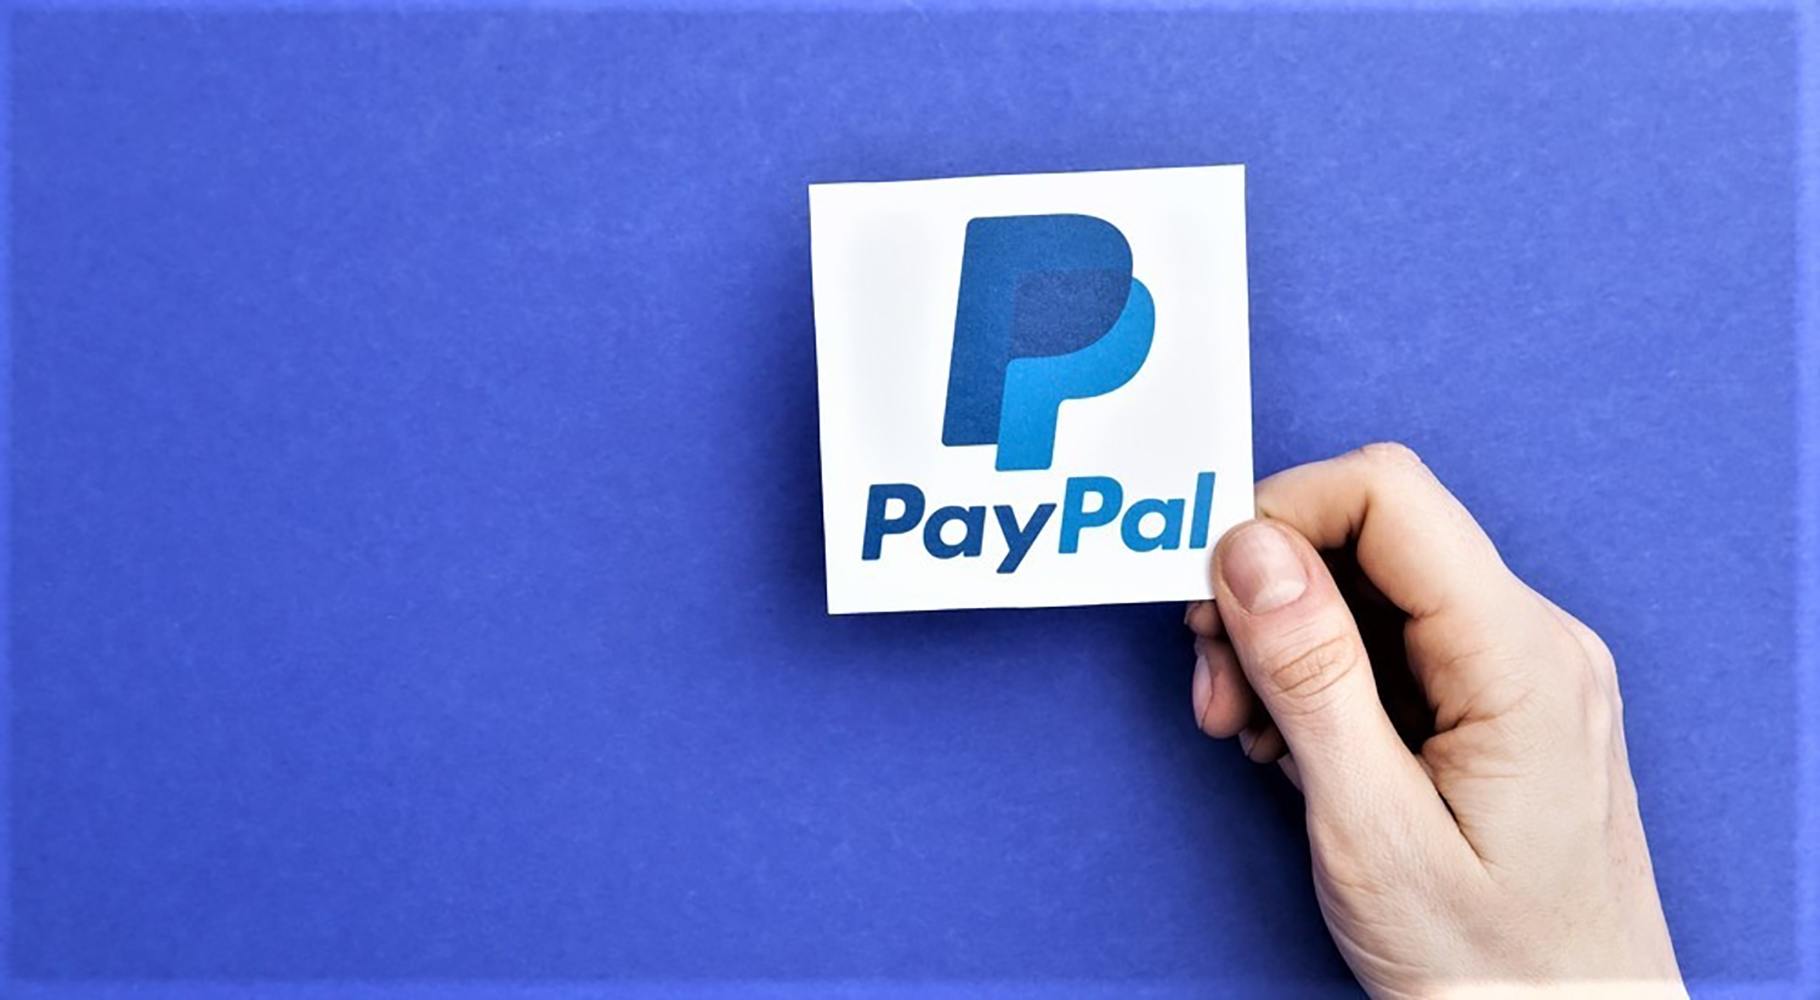 PayPal-bookmakers that accept PayPal